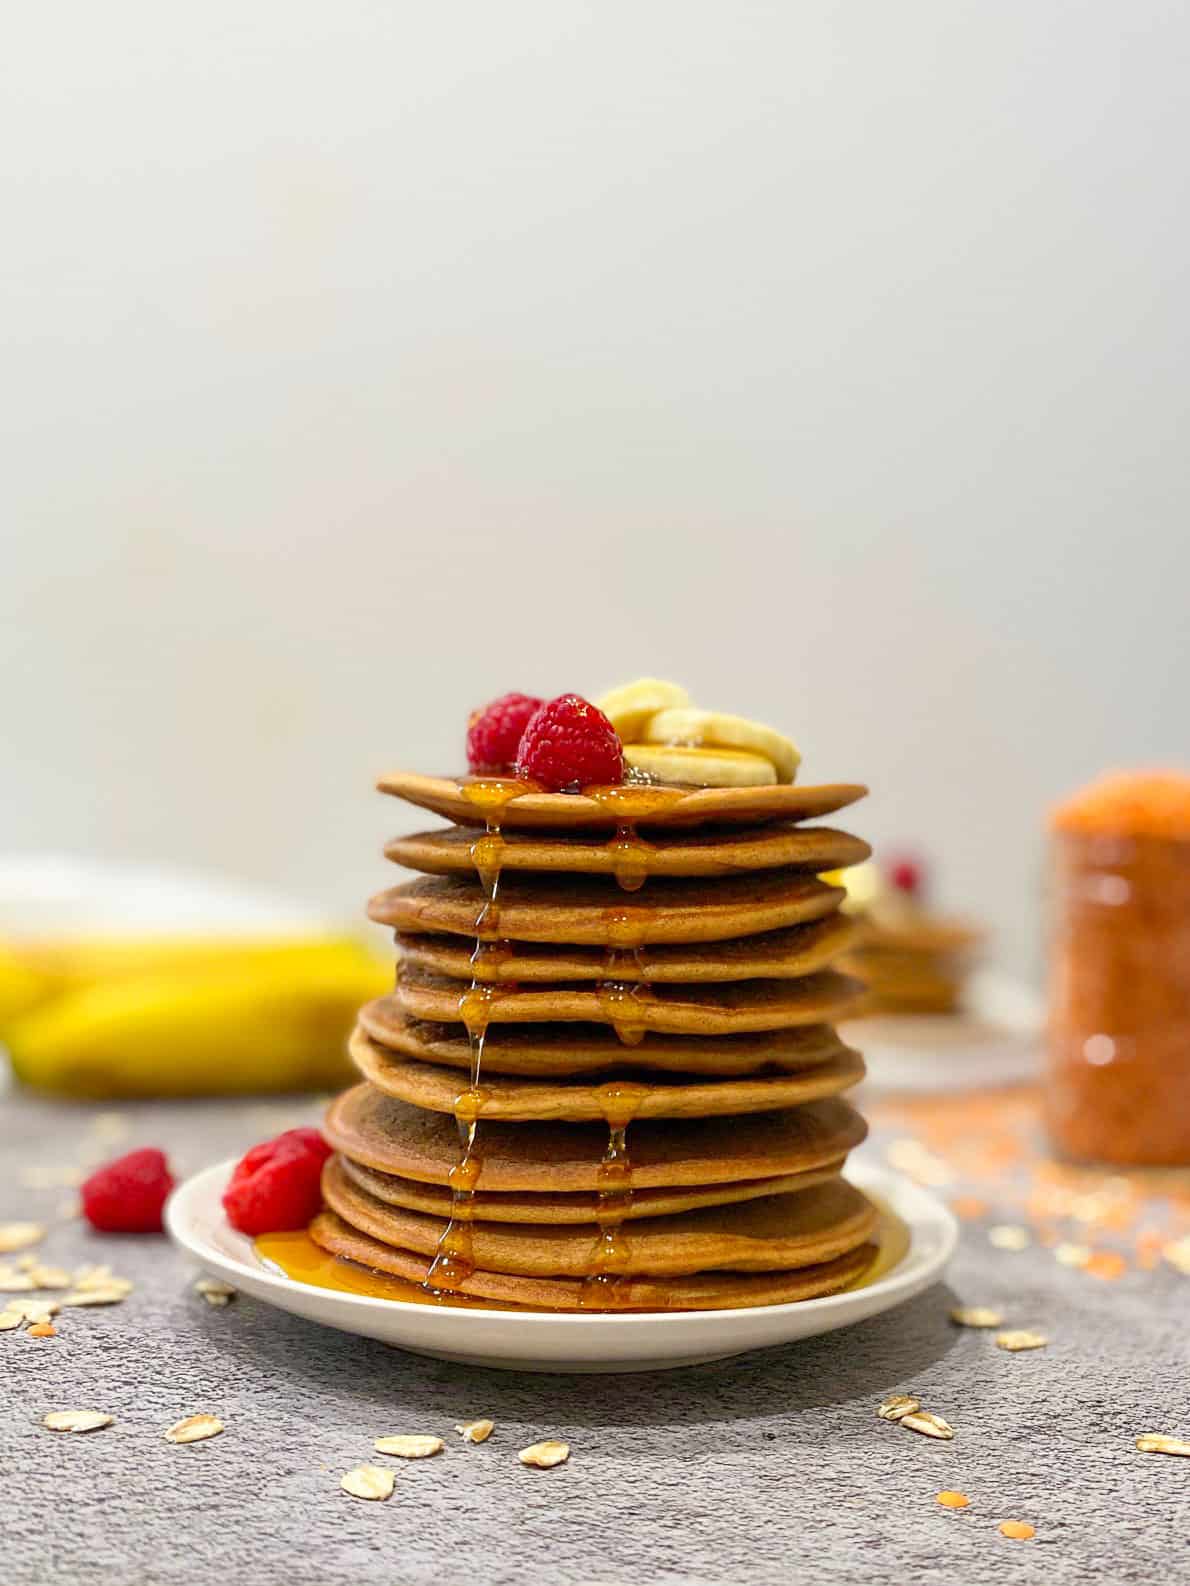 Stack of lentil pancakes with raspberries and banana slices on top and maple syrup dripping down.